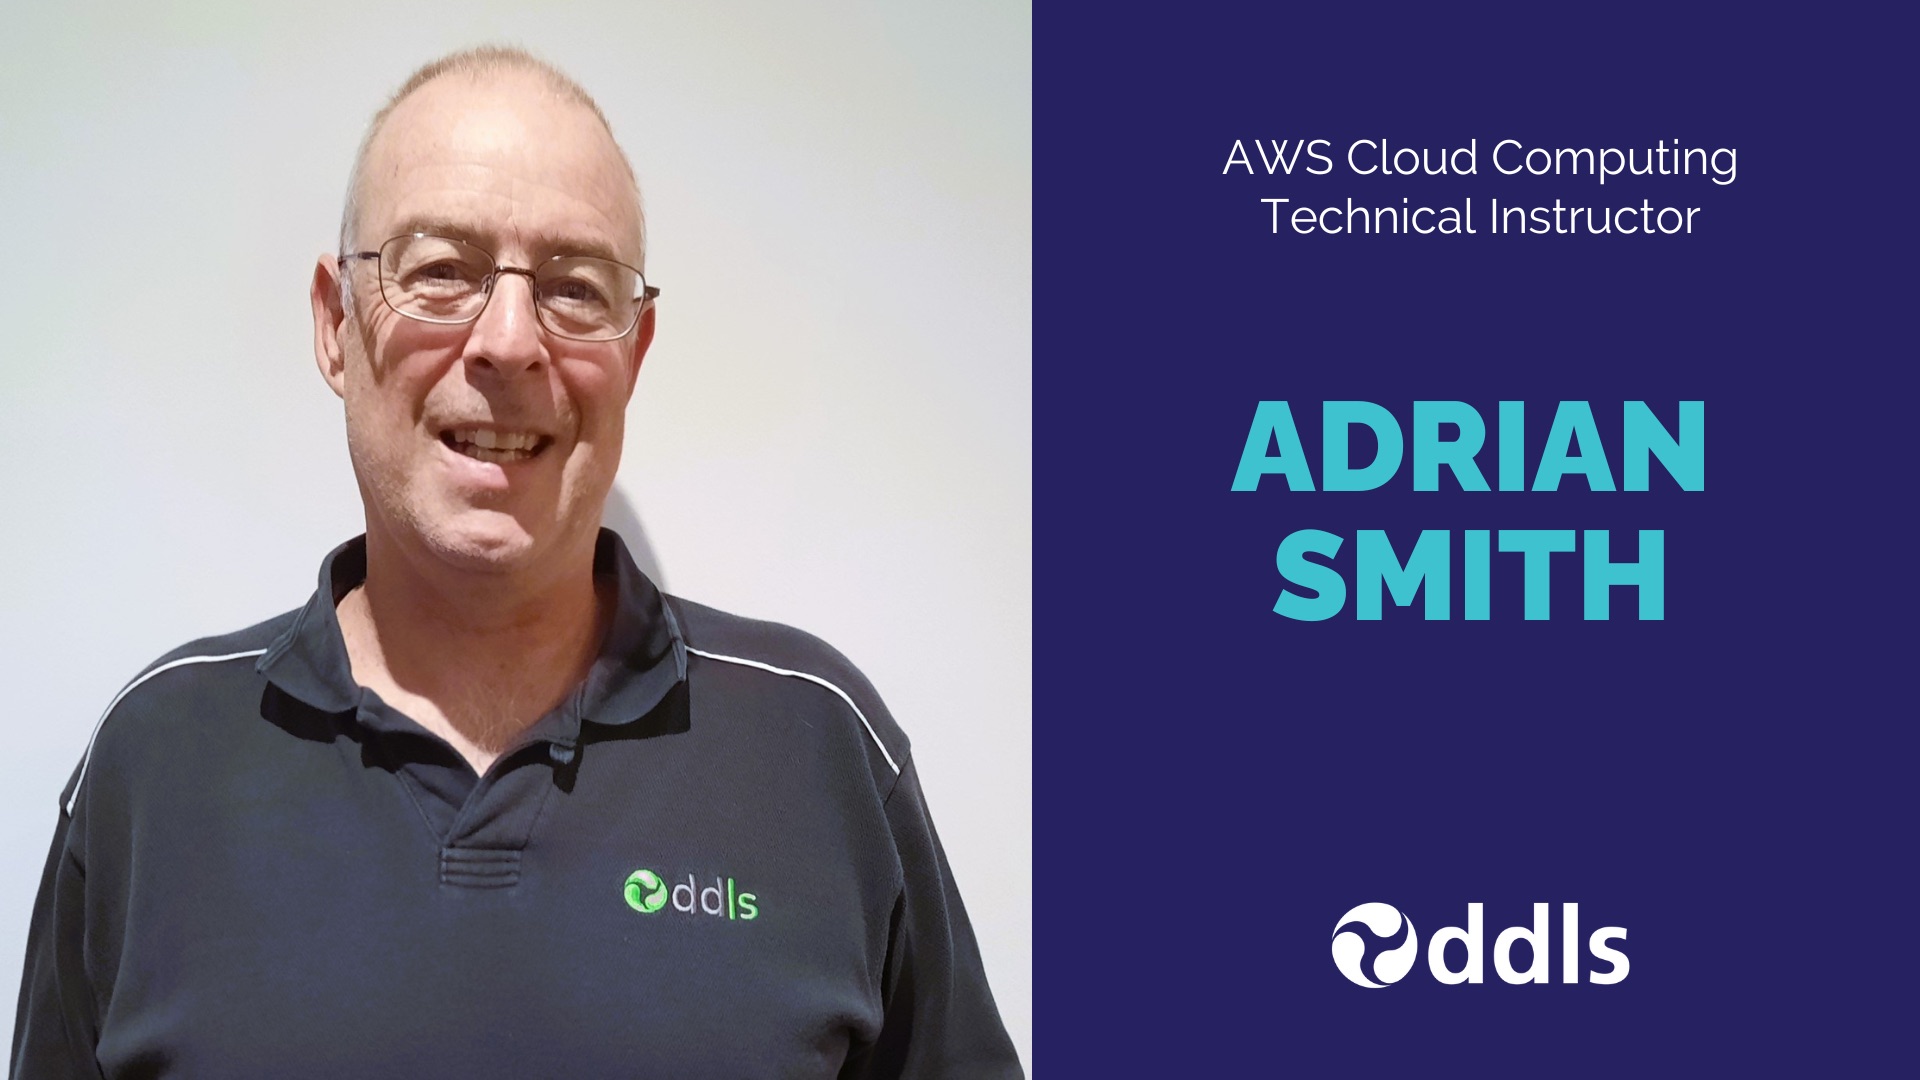 On light bulb moments and innovating on the cloud - Insights from our AWS Authorised Instructor - Adrian Smith